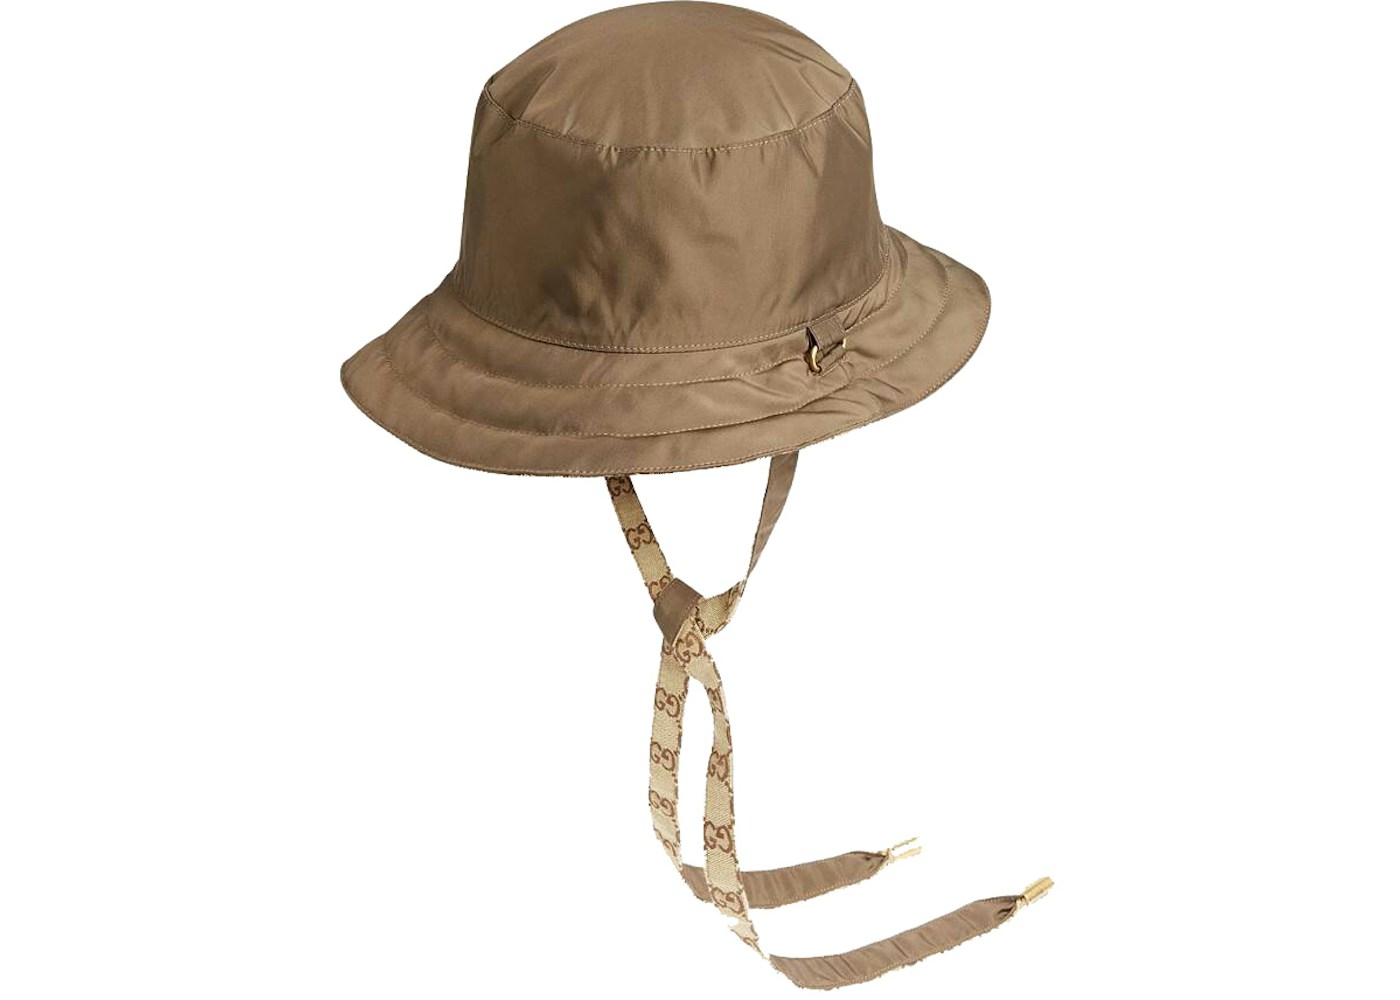 Gucci Reversible Hat in GG Canvas and Nylon Beige/Brown in Canvas/Nylon